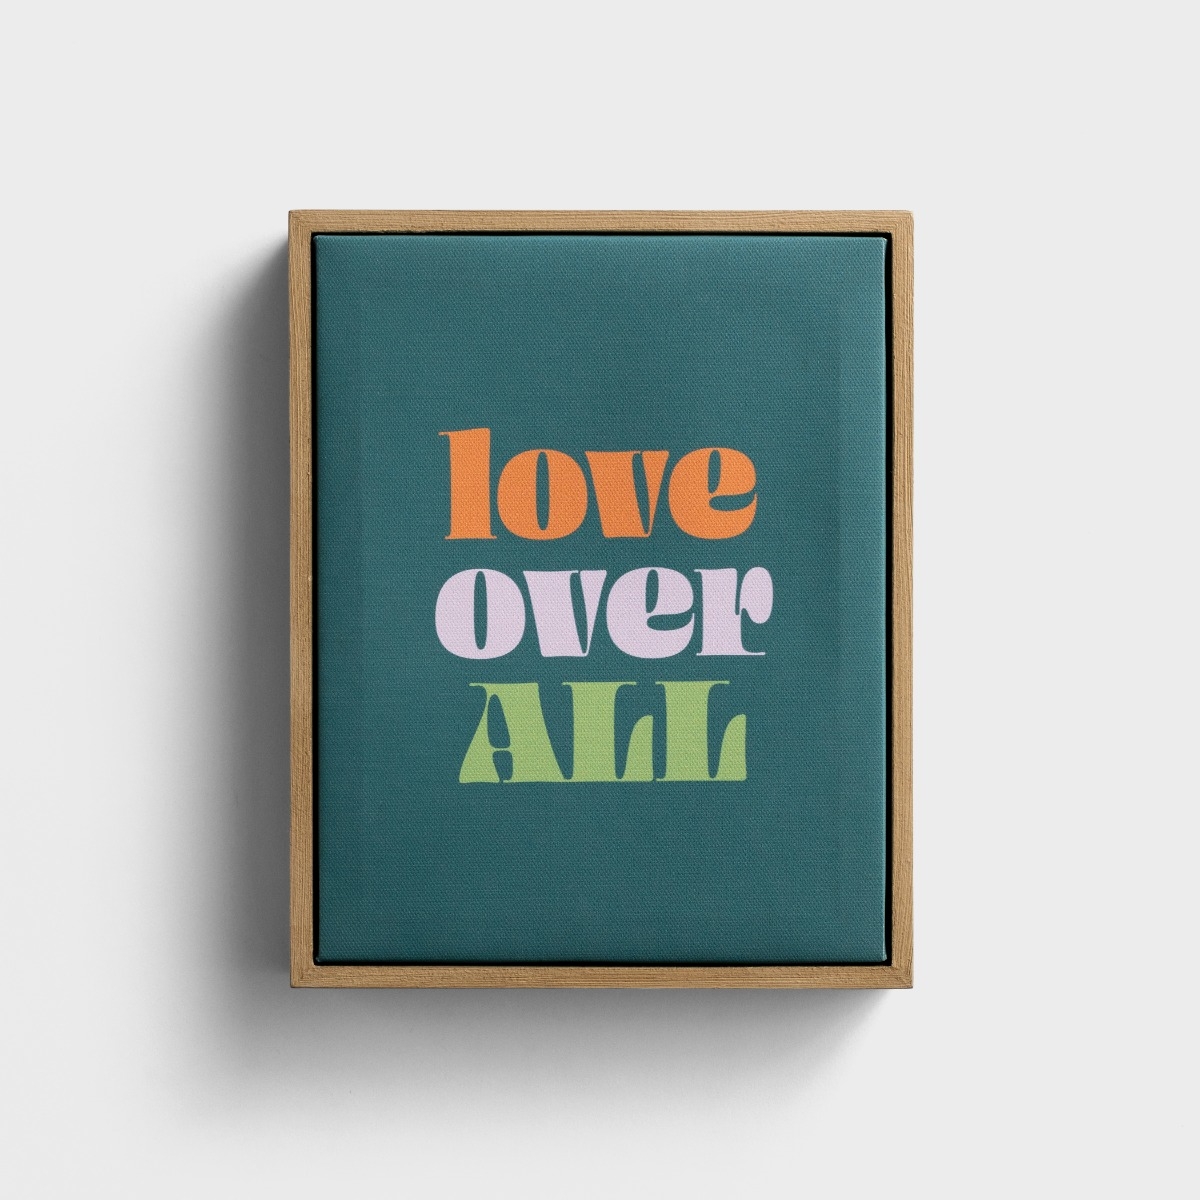 Candace Cameron Bure - Love Over All - Inspirational Wall Decor